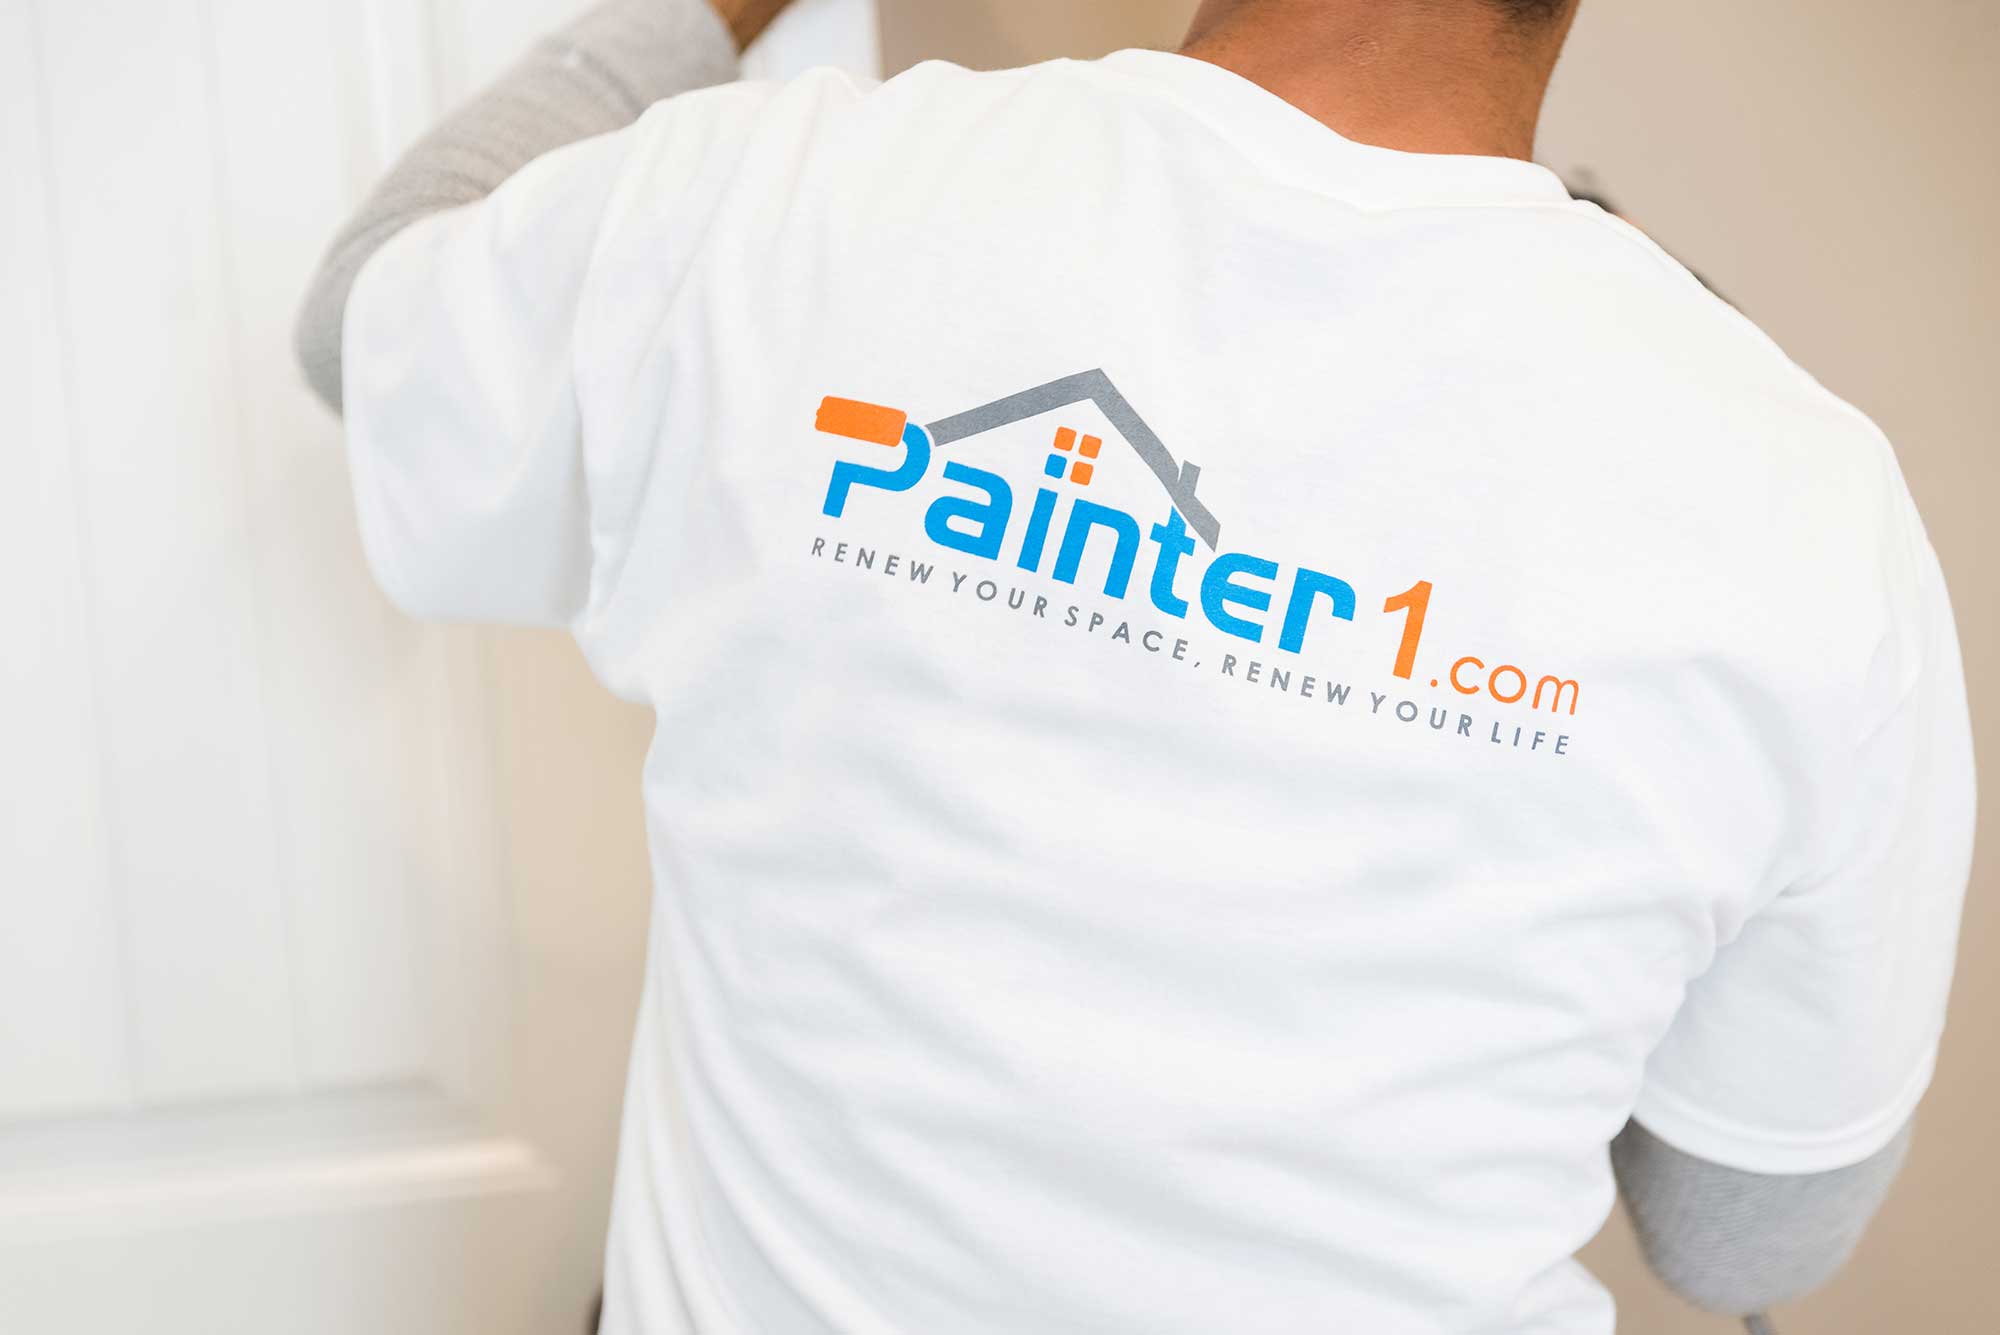 If you are searching for wallpaper removal in Washington D.C. / DMV, Painter1 offers professional wallpaper removal in Washington D.C. / DMV.